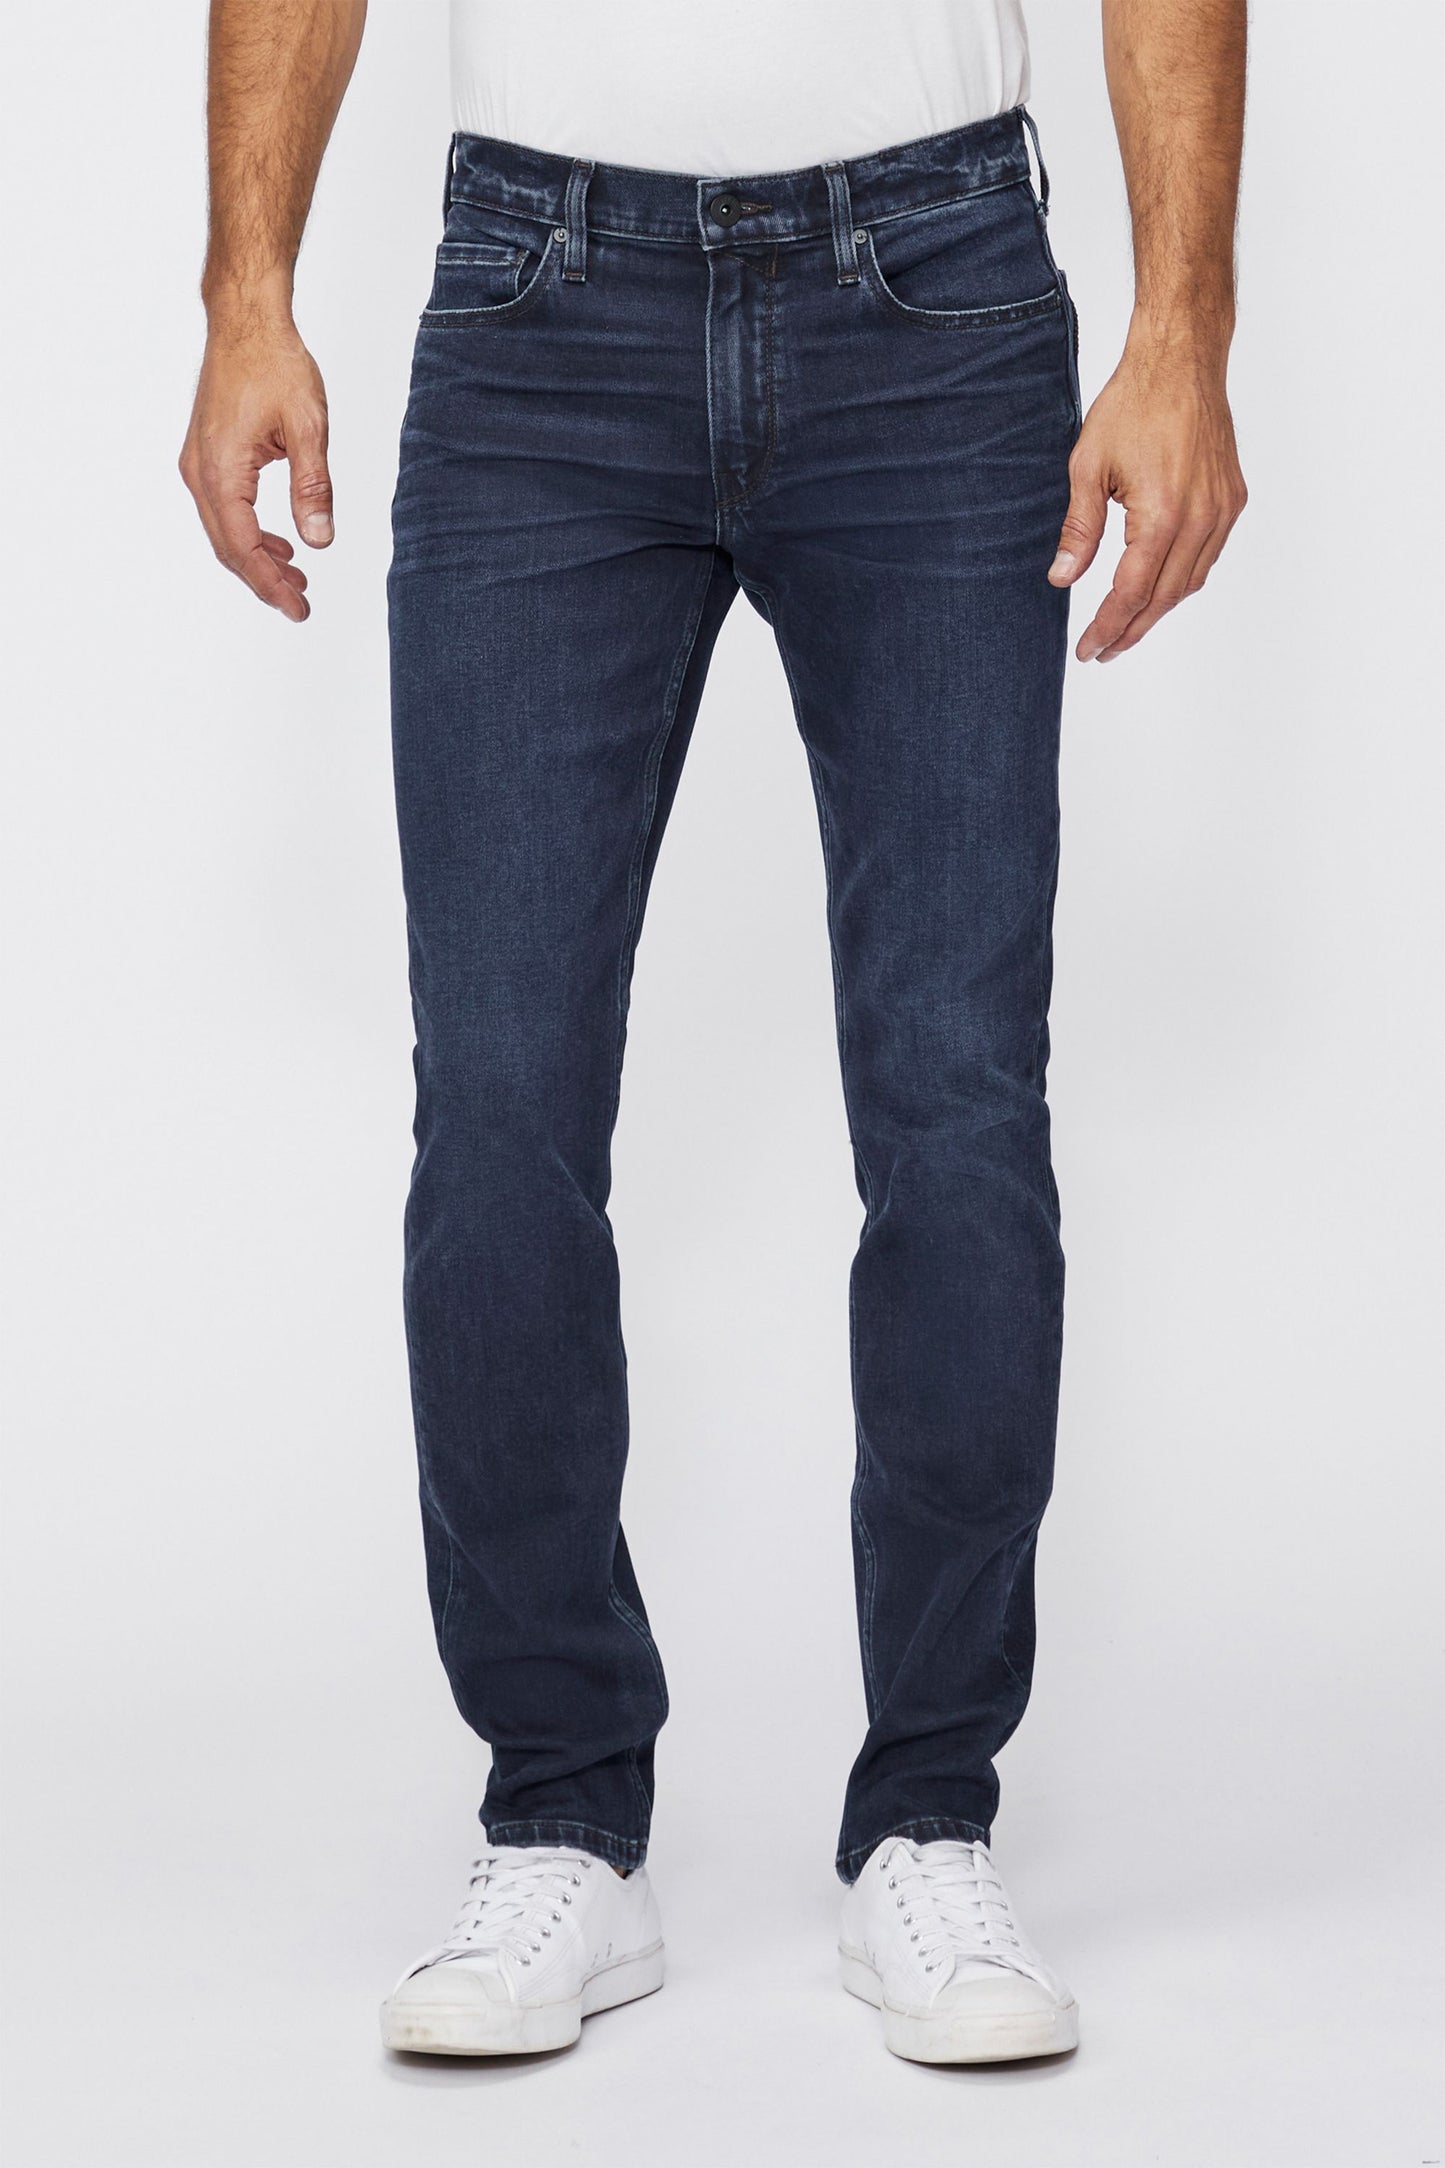 PAIGE Federal Slim Straight Jeans in the color Jenkins